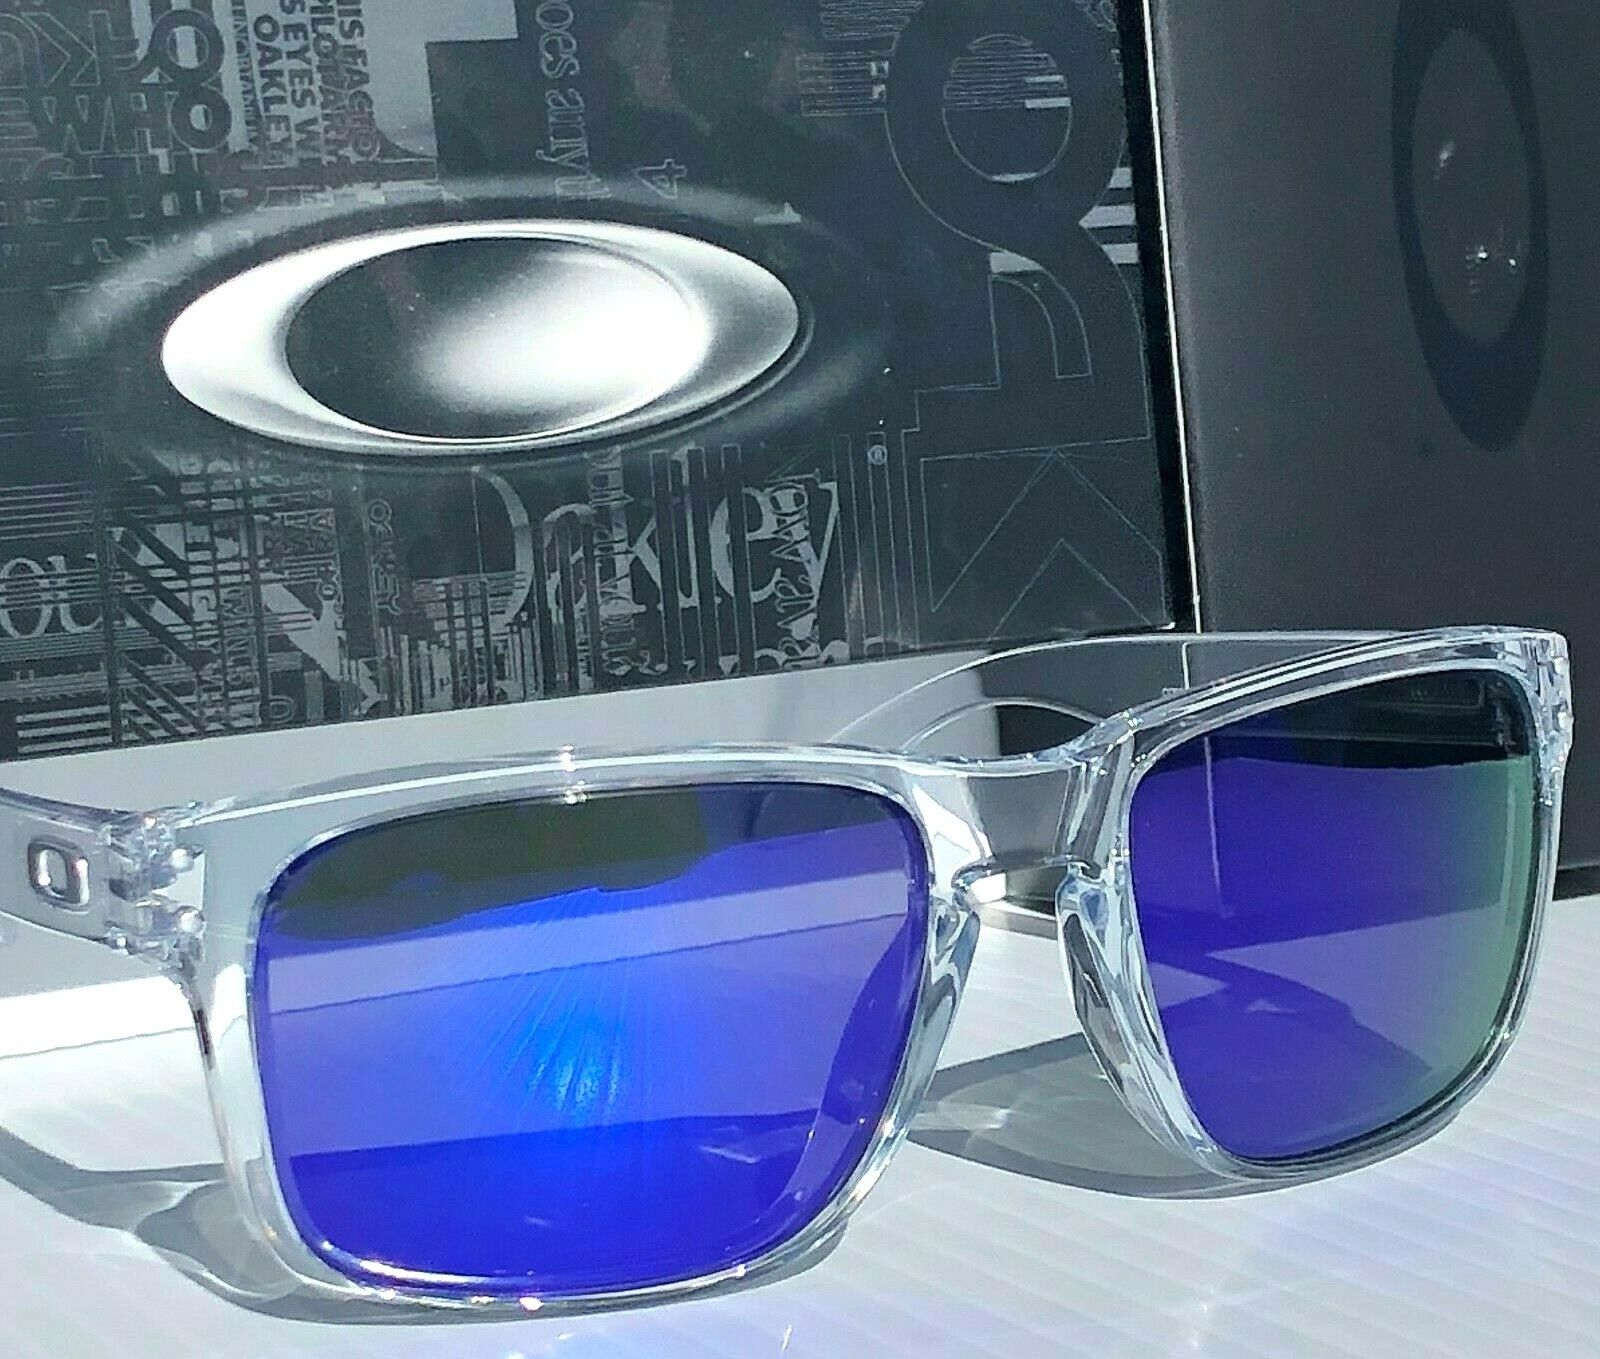 Syndicate Midler At placere NEW* Oakley HOLBROOK CLEAR w POLARIZED Galaxy Blue Iridium Sunglass 9102 |  eBay